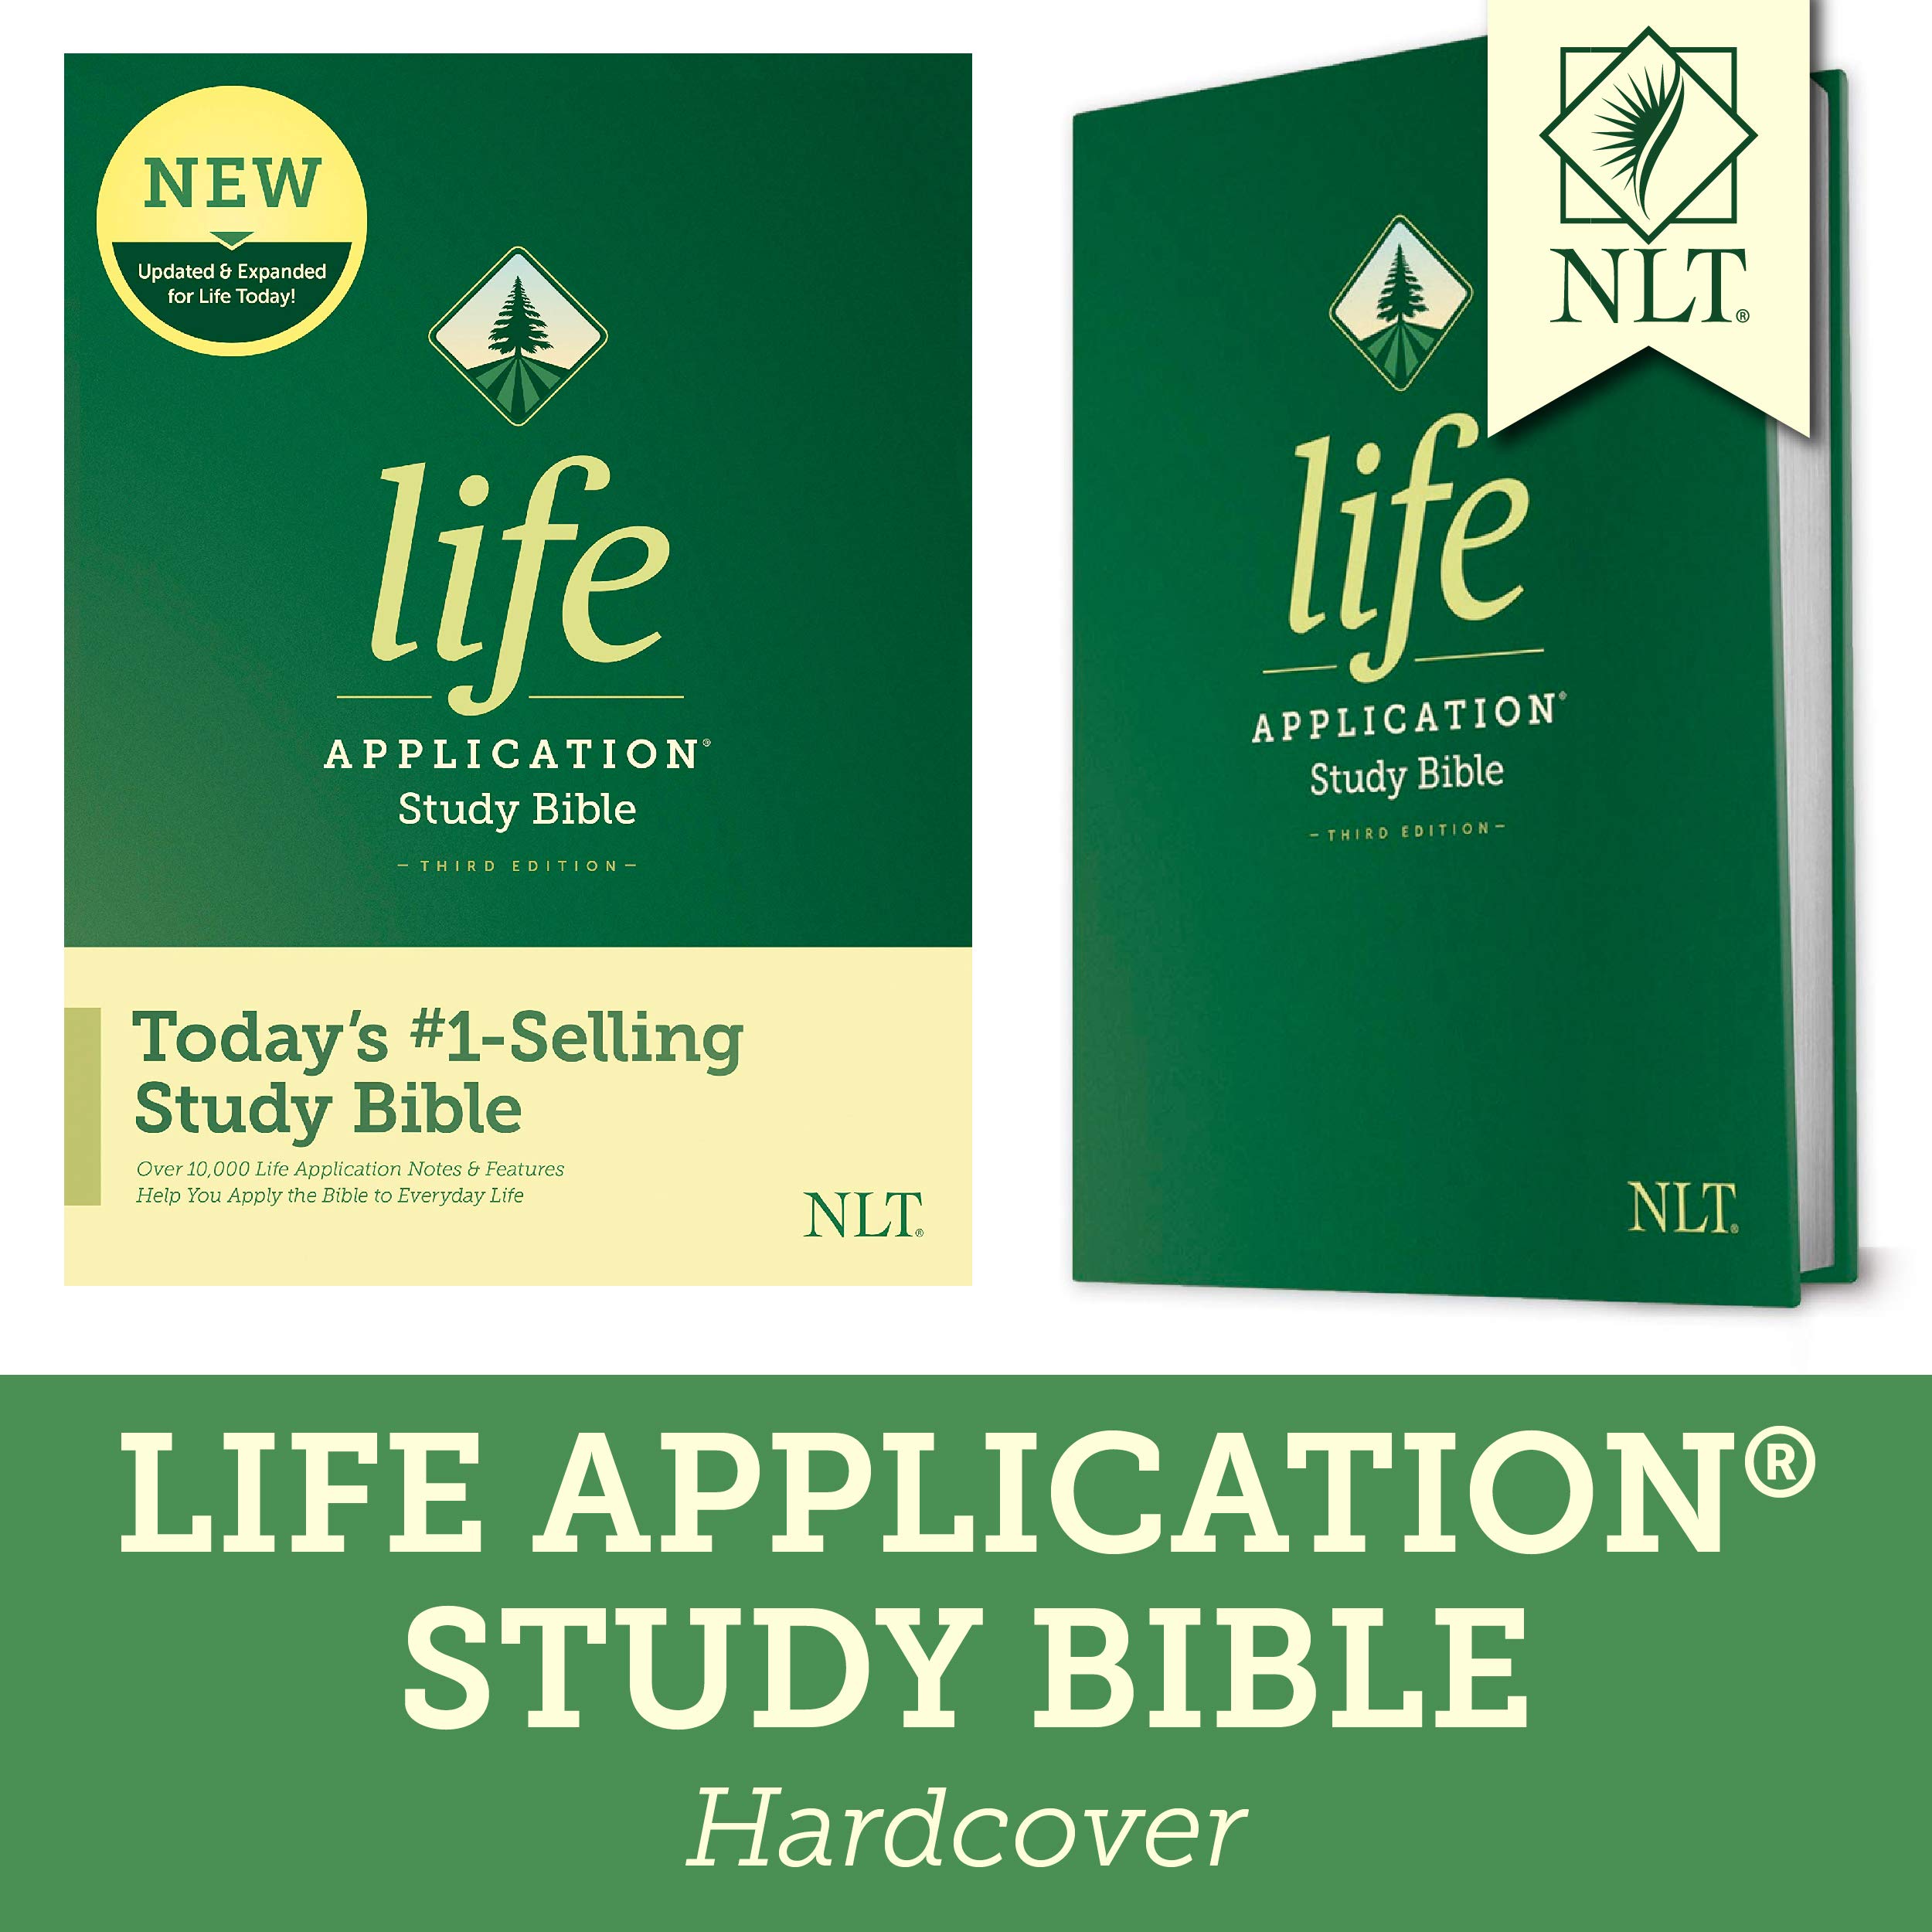 More information on NLT LIFE APPLICATION STUDY BIBLE, THIRD EDITION